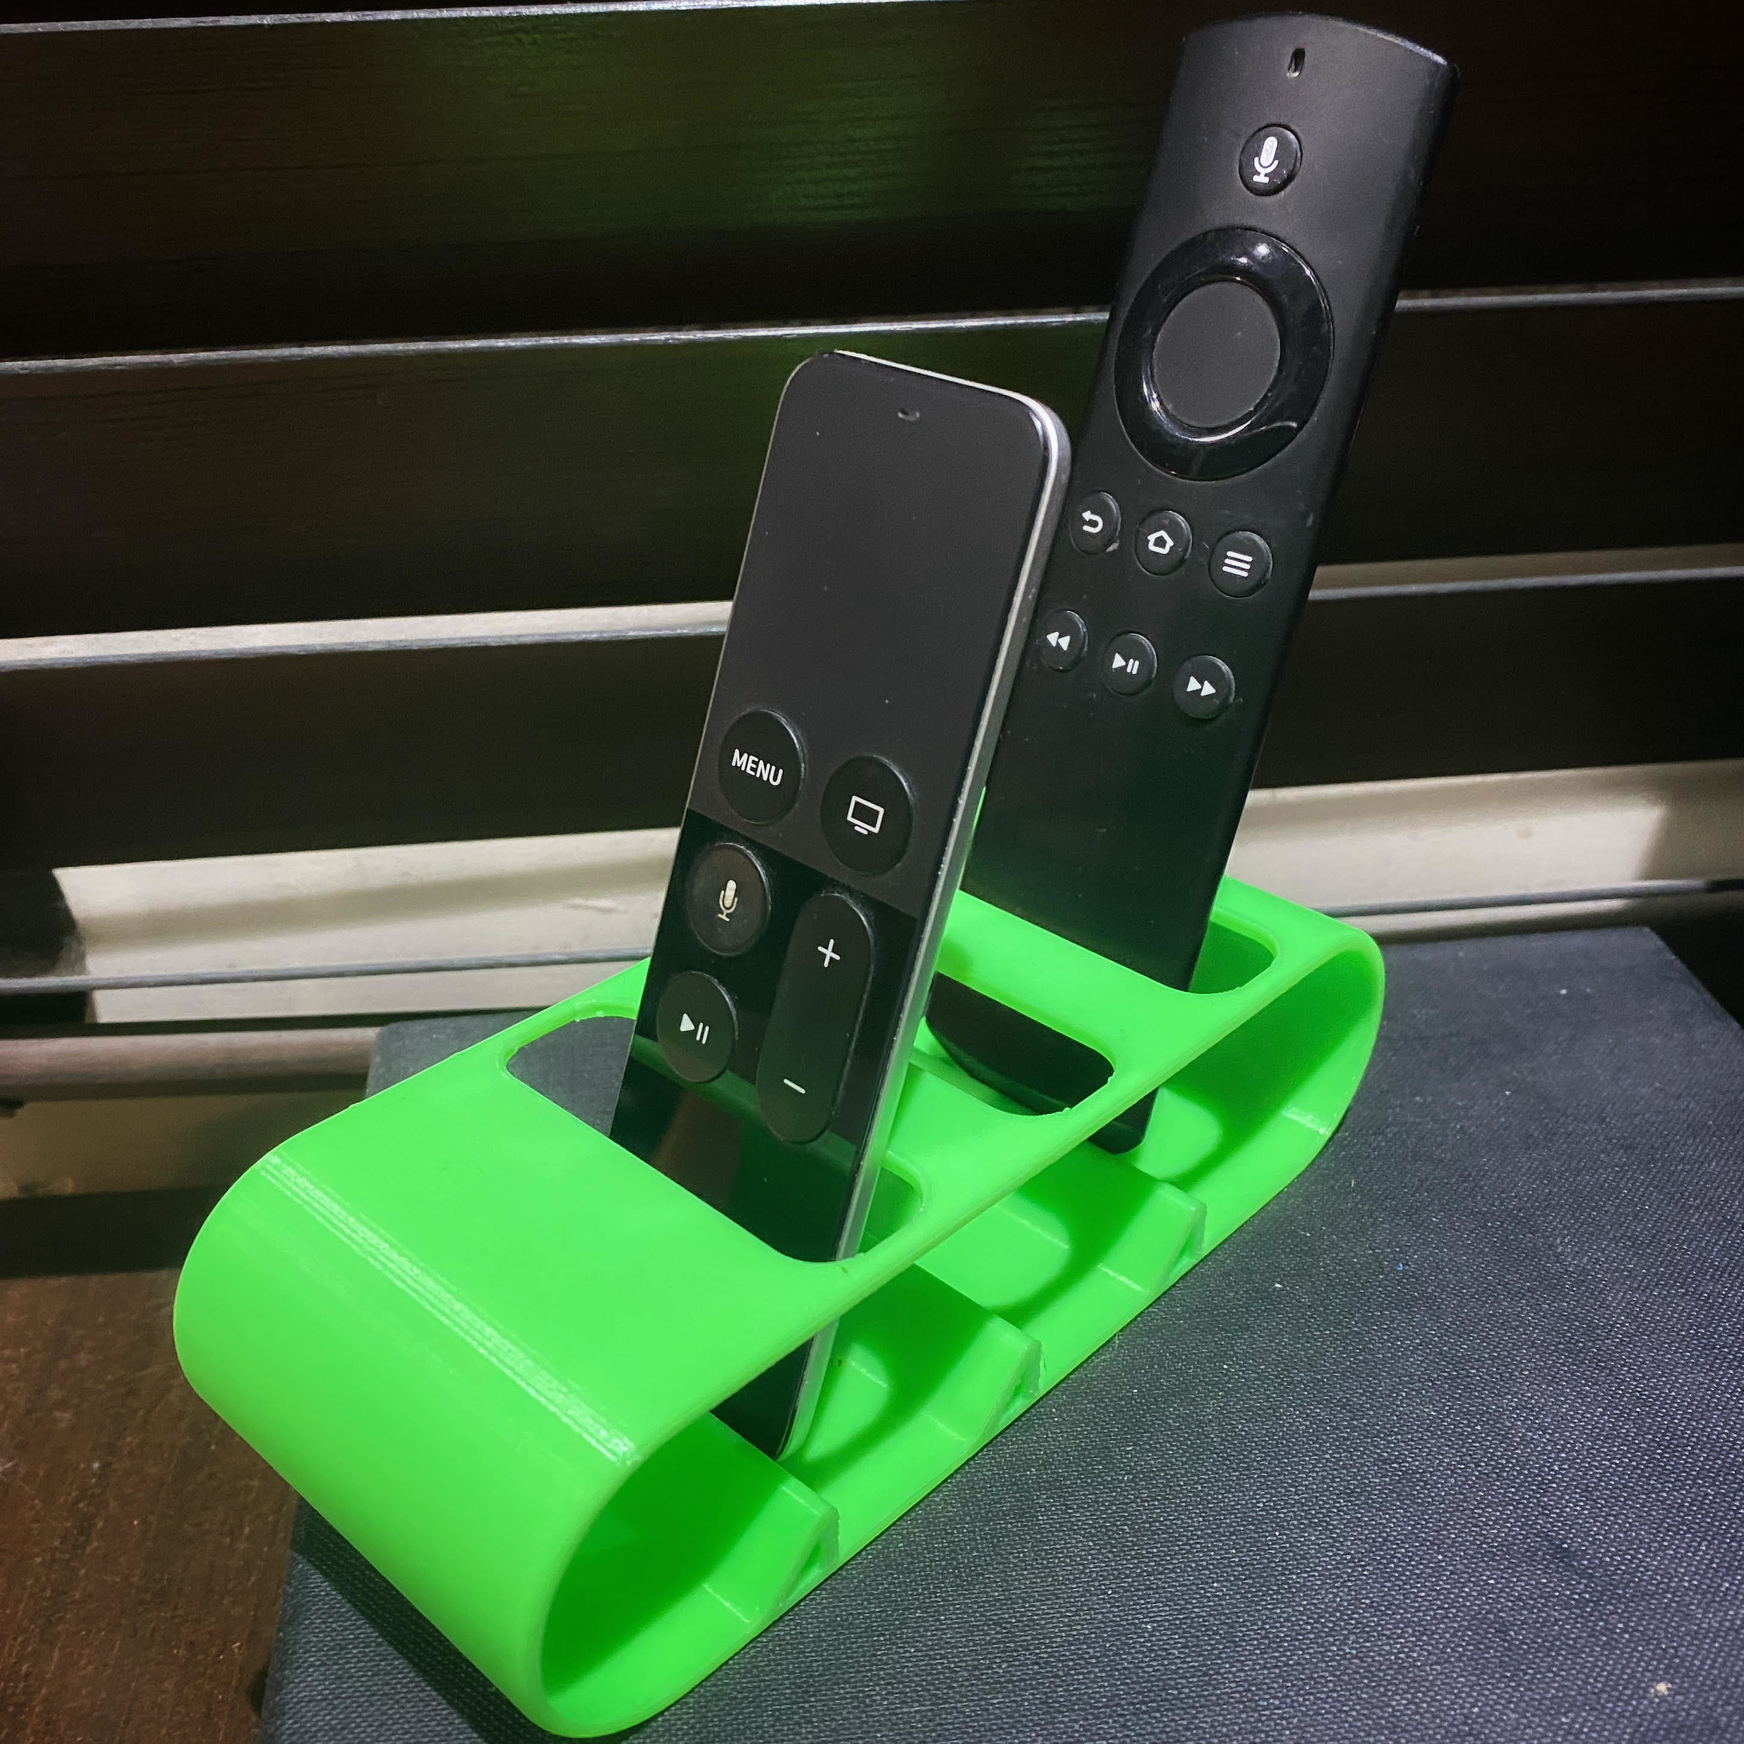 Fluidic3D on Twitter: "3D Printed this Remote Control Holder #3dprinting #3dprint #3dprints #3dprinted #3dprinter #3dprinters #3dprintable #3dprintmodel https://t.co/j9LjV2UhvY" / Twitter